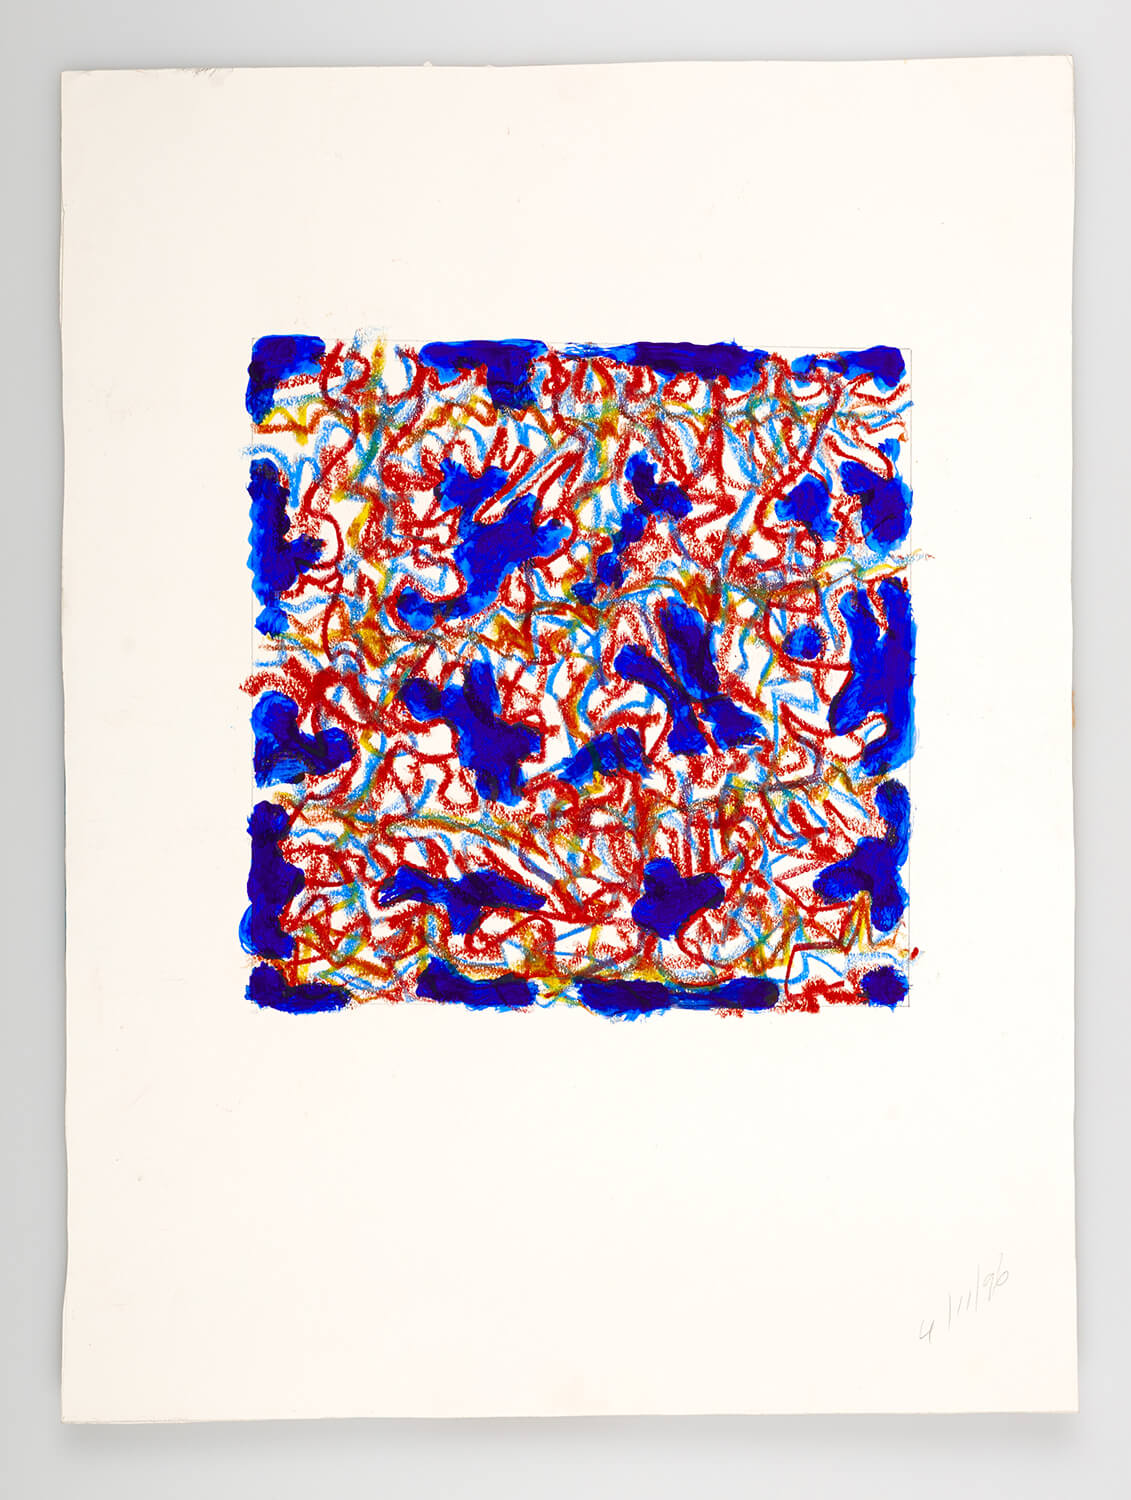 JB133 - Abstract Blue - 1996 - 25 x 25 cm - Acrylic and conte on paper